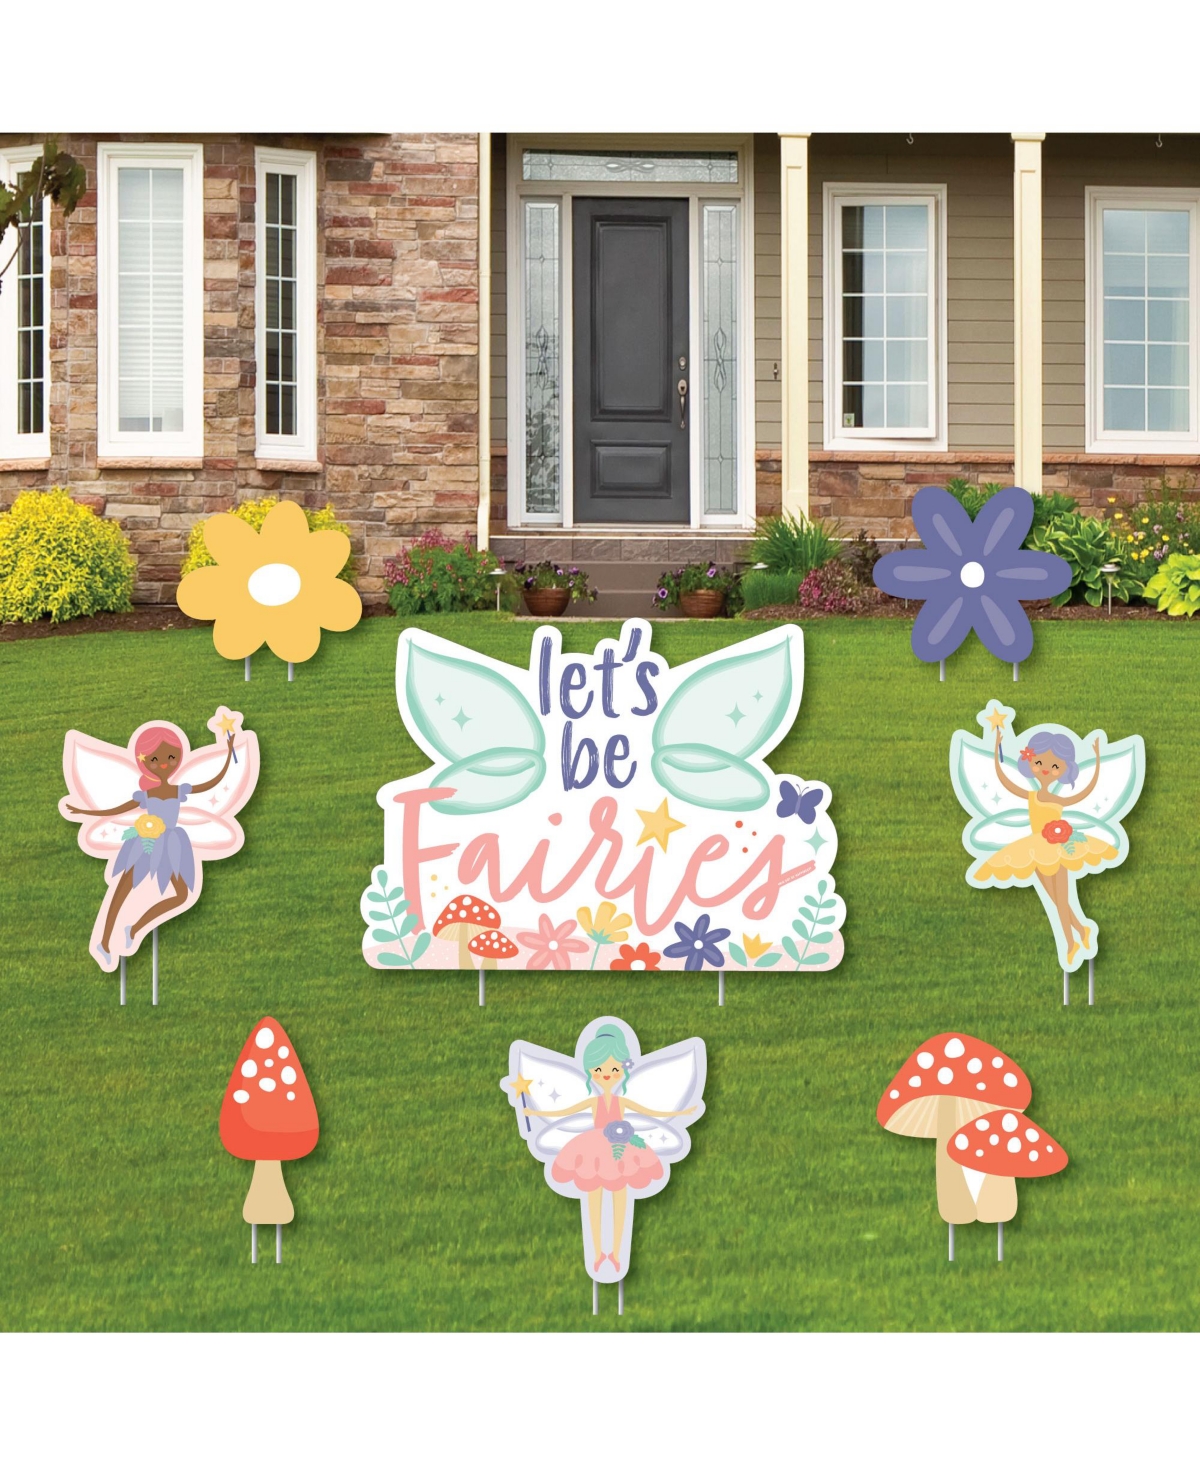 Lets Be Fairies Outdoor Lawn Decor Fairy Garden Birthday Party Yard Signs 8 Ct